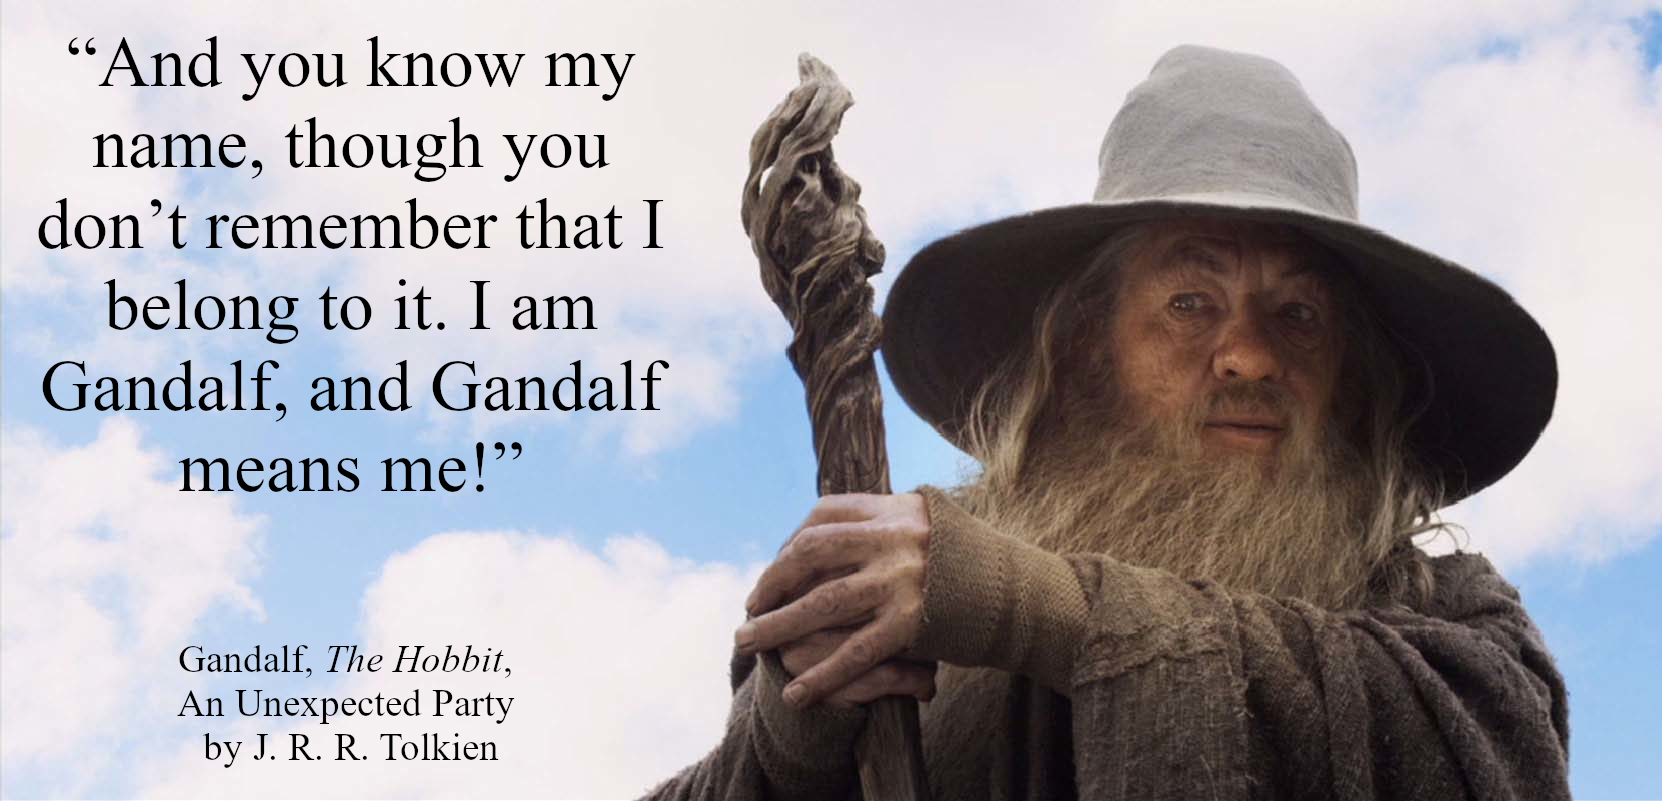 “And you know my name, though you don’t remember that I belong to it. I am Gandalf, and Gandalf means me!” - Gandalf, The Hobbit, An Unexpected Party by J. R. R. Tolkien